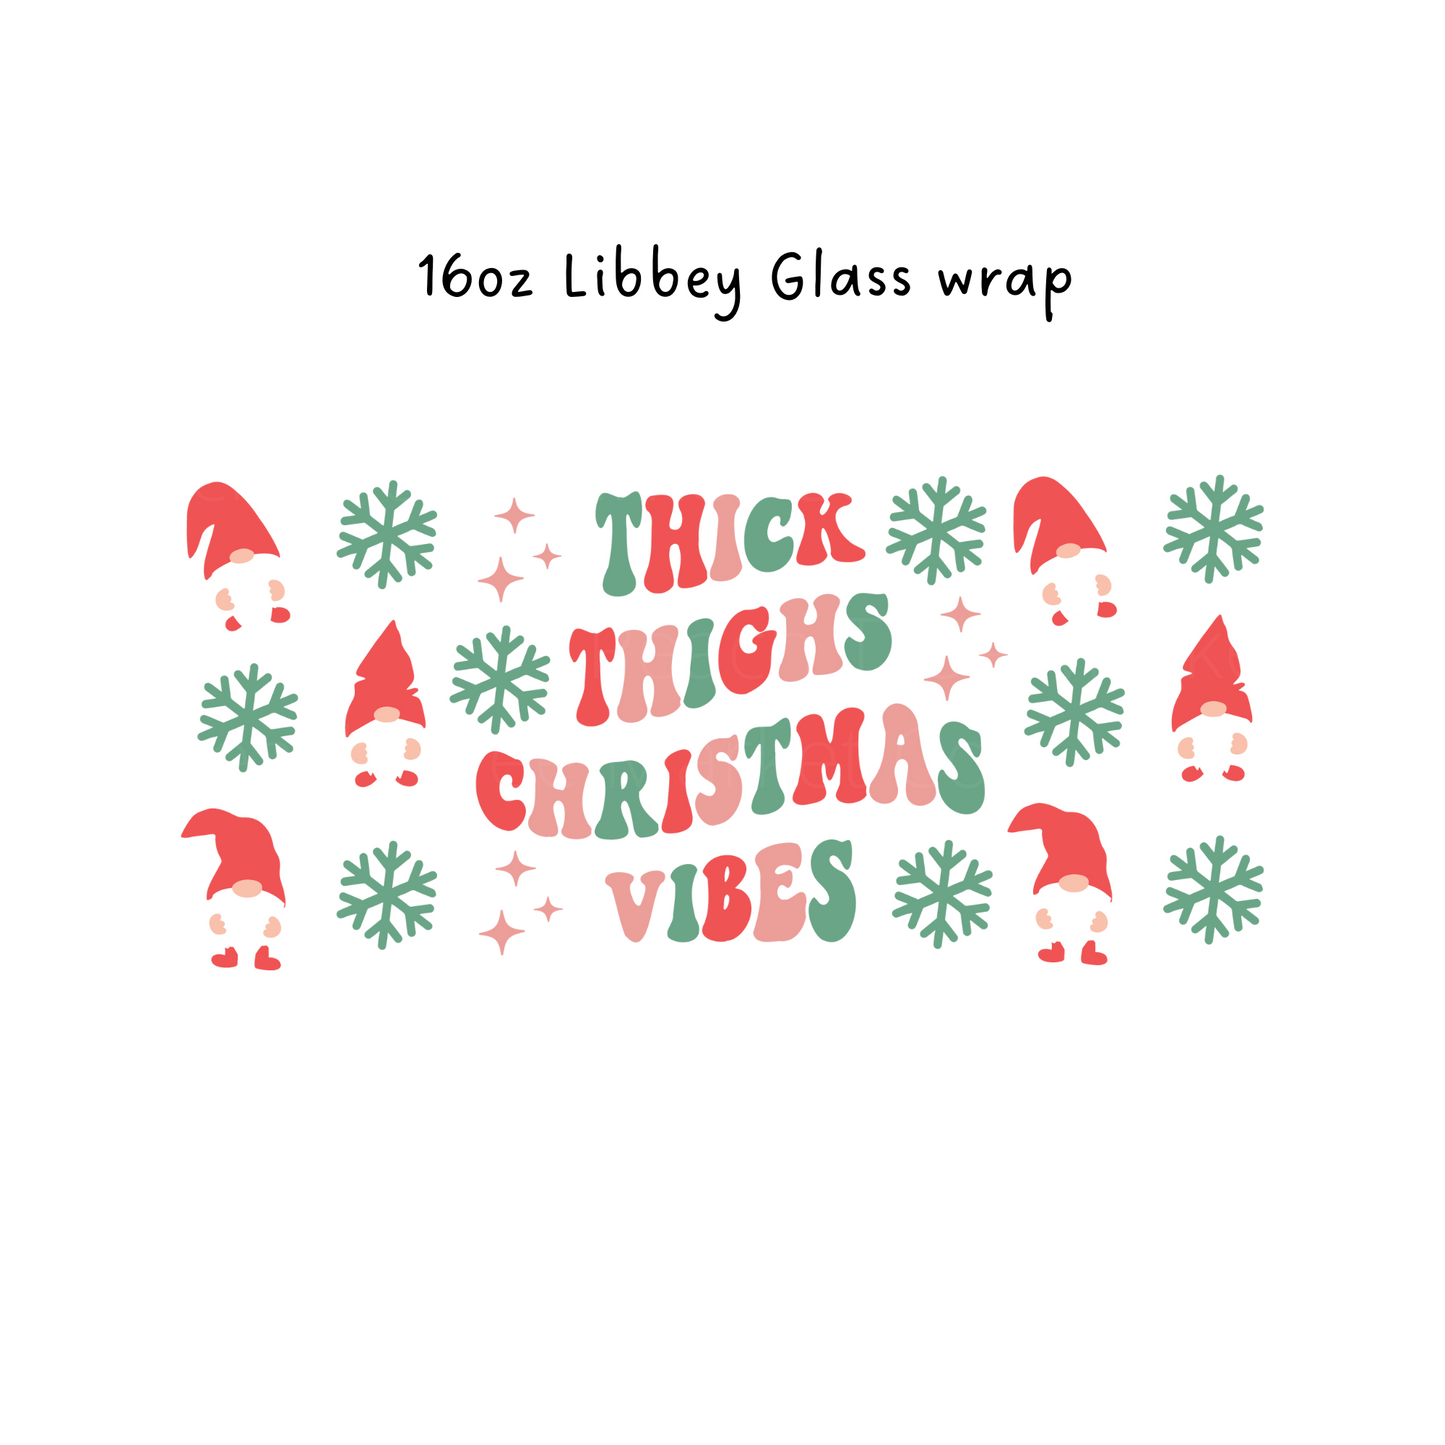 Thick Thighs and Christmas Vibes 16 Oz Libbey Beer Glass Wrap